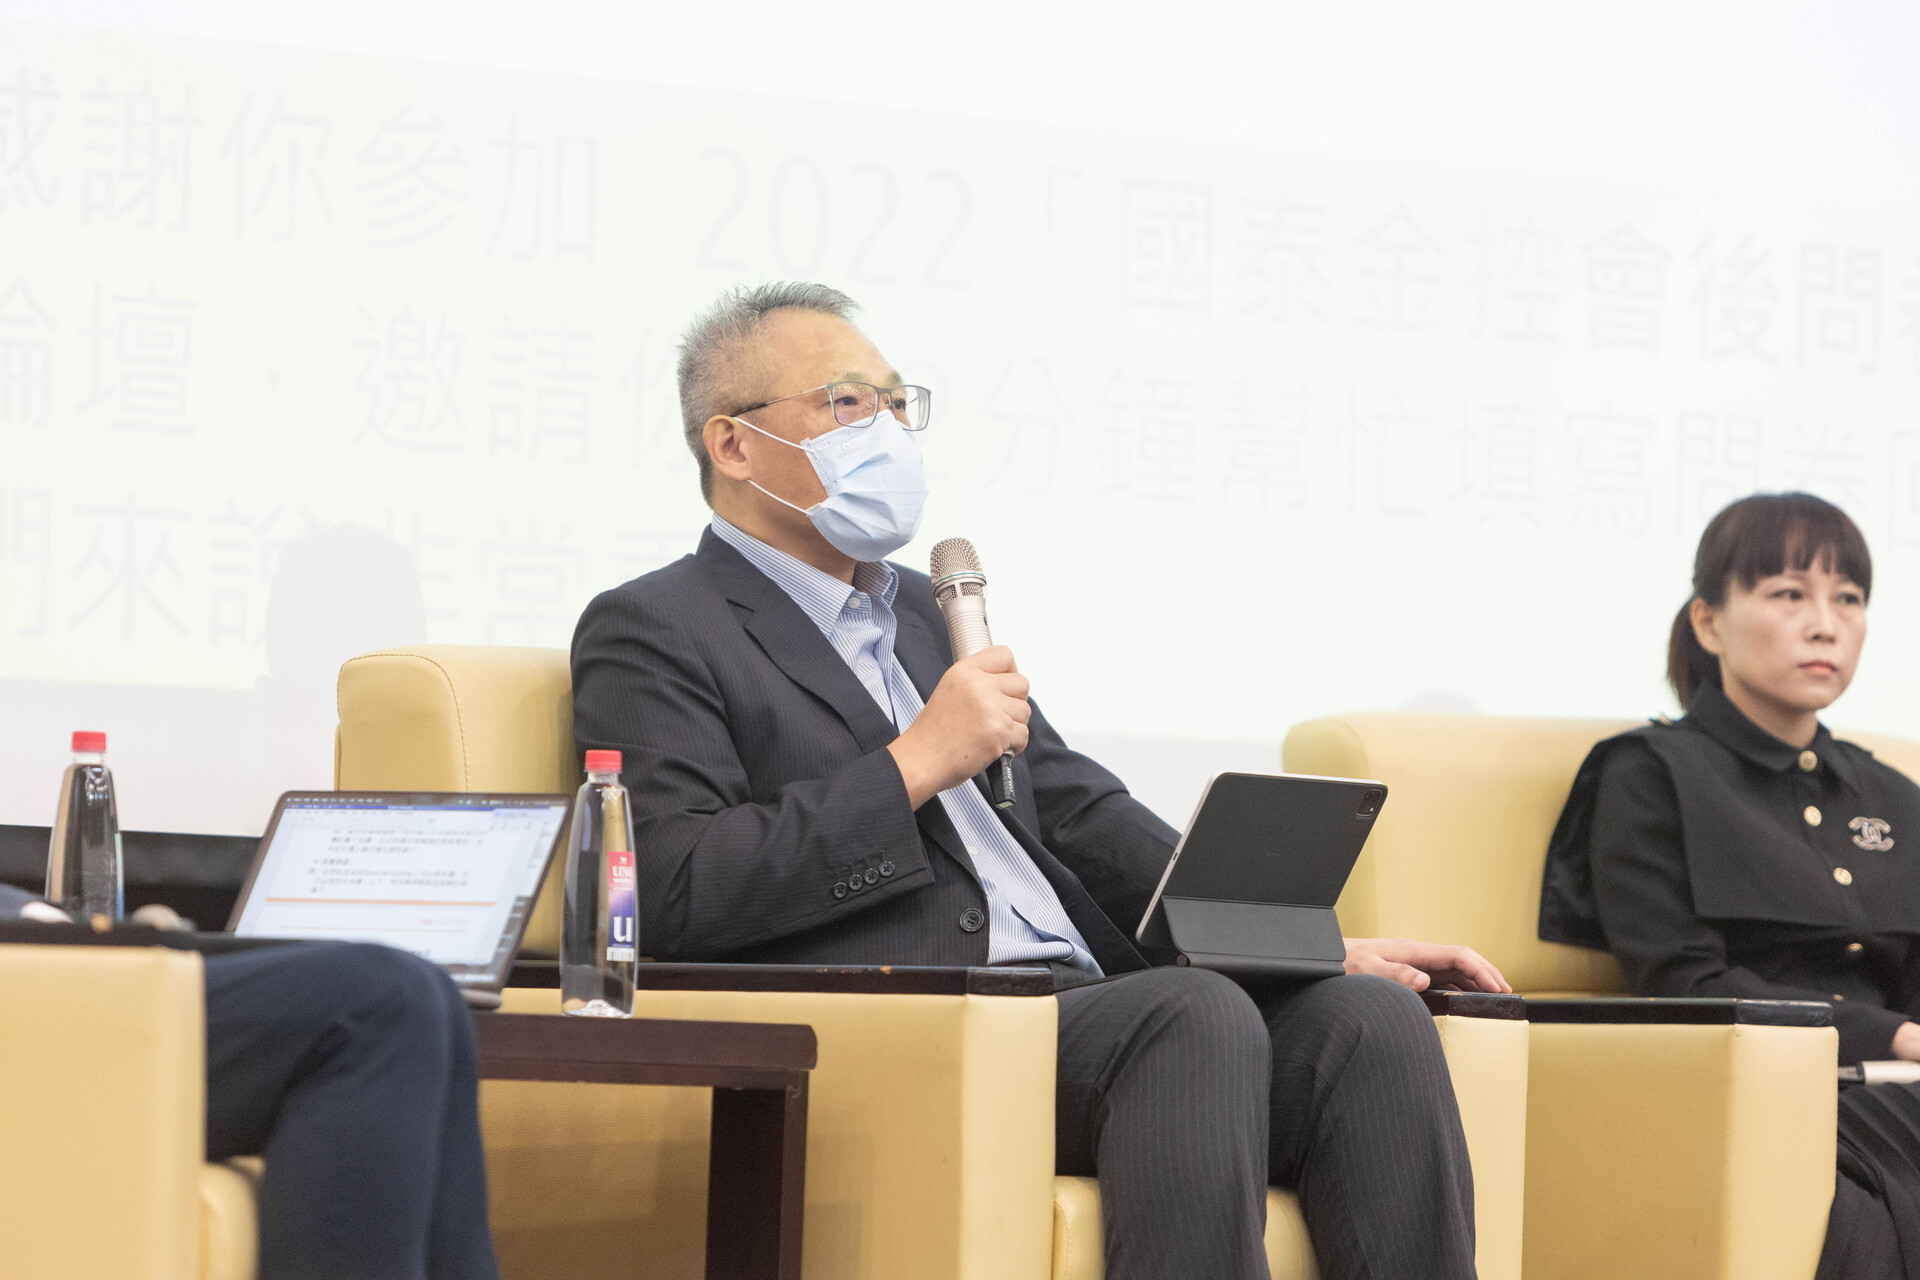 Cathay Life’s Vice President Li shares how Cathay continues to invest in ESG, with “climate,” “health,” and “empowerment” as the three main axes of development